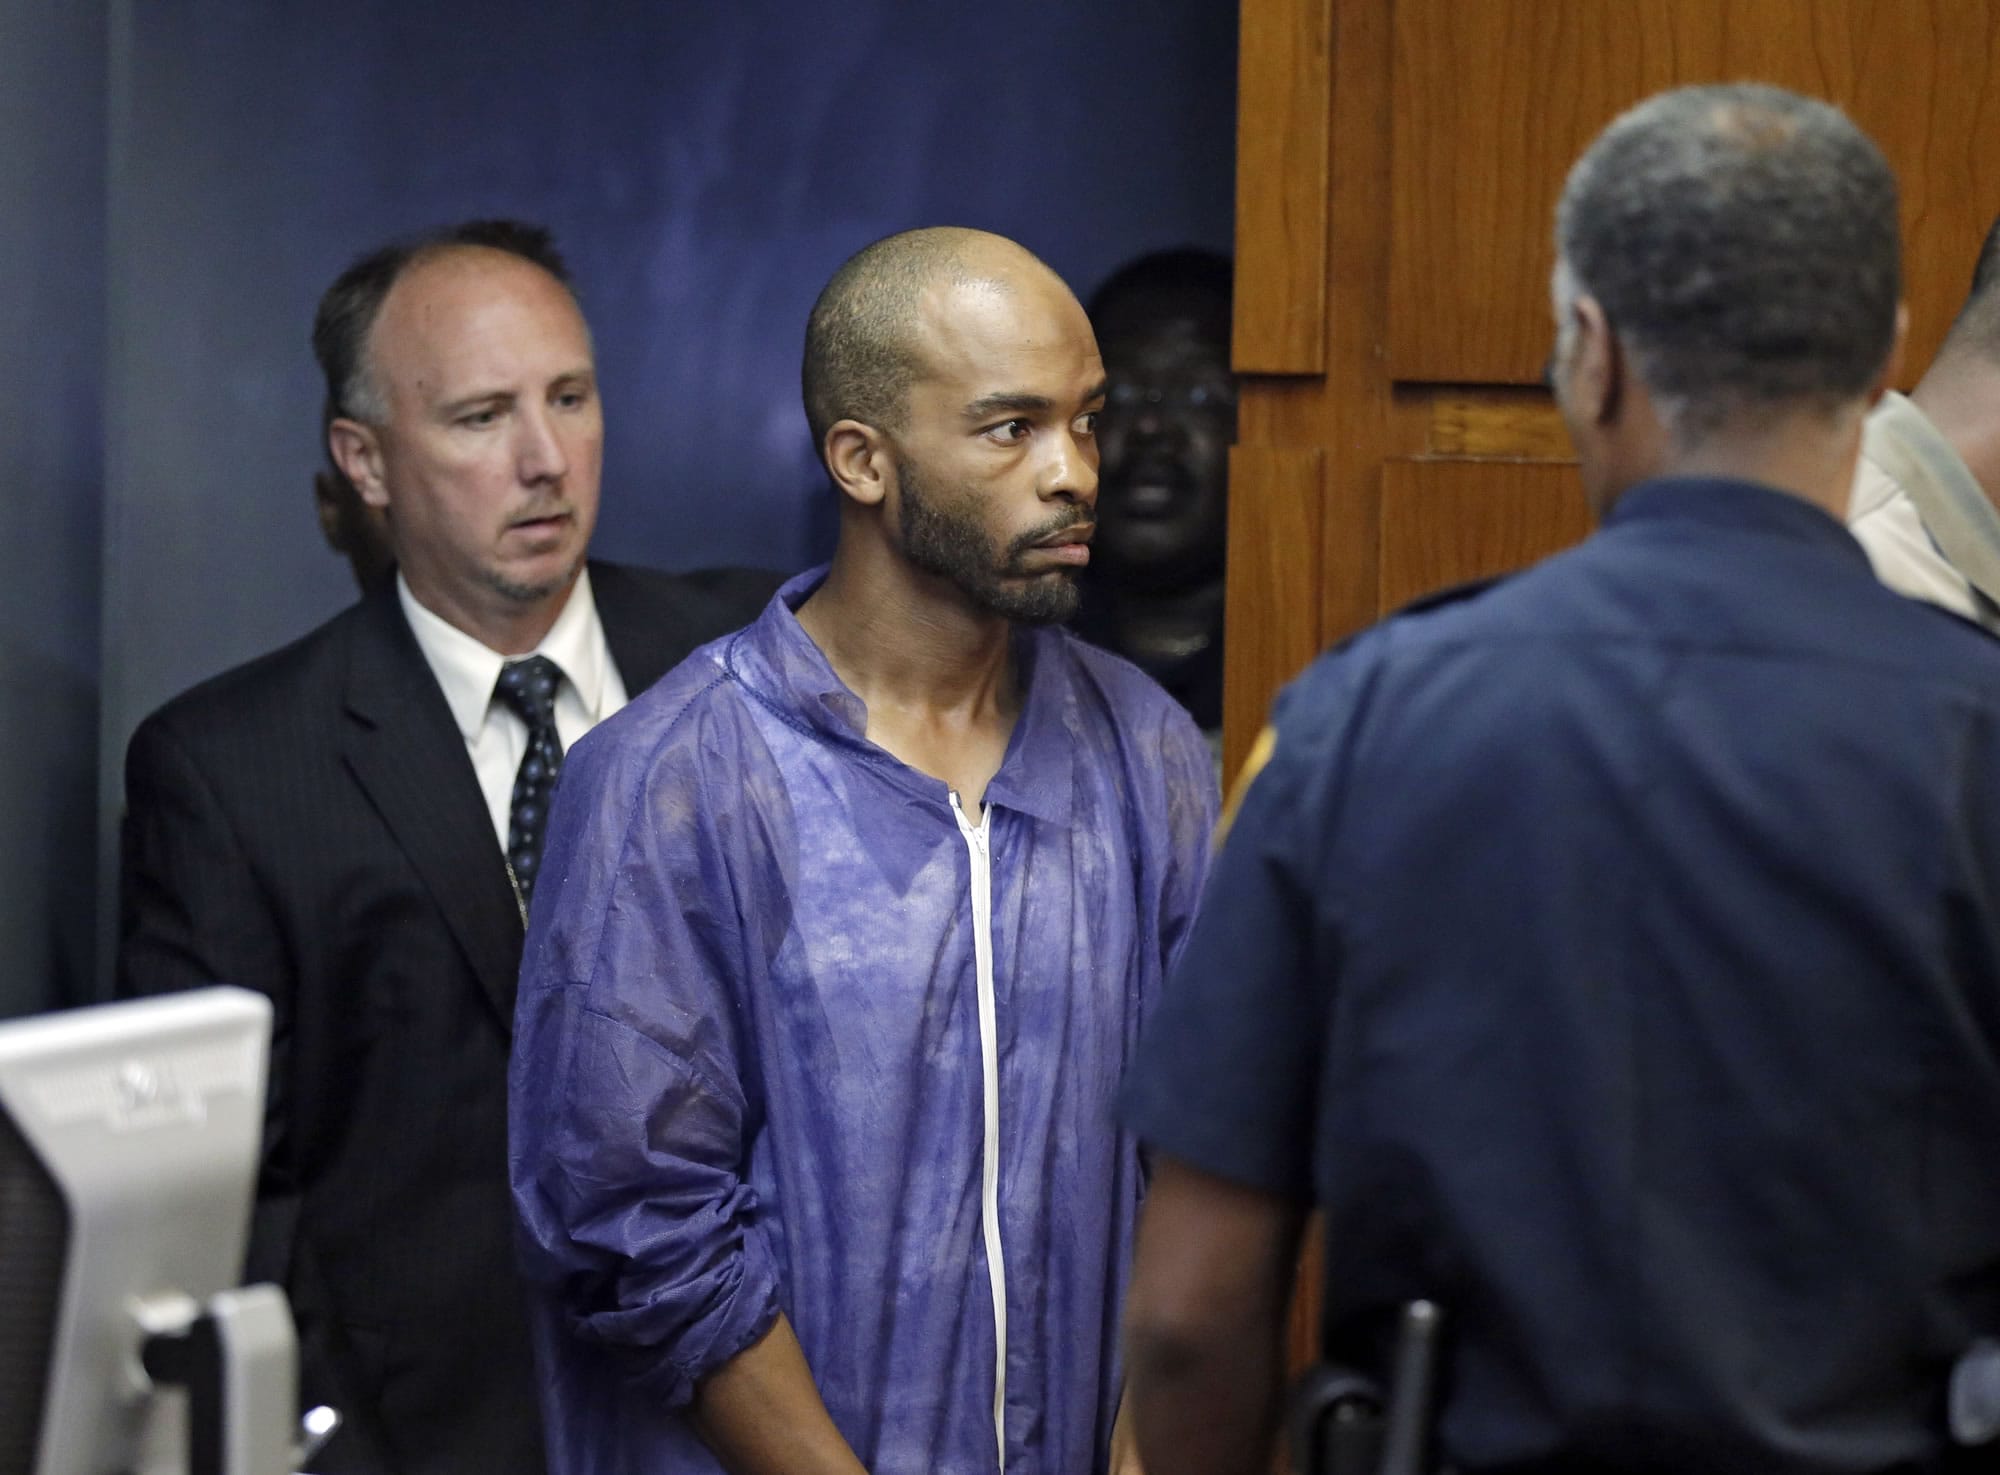 Michael Madison is brought into court for his arraignment in East Cleveland, Ohio.